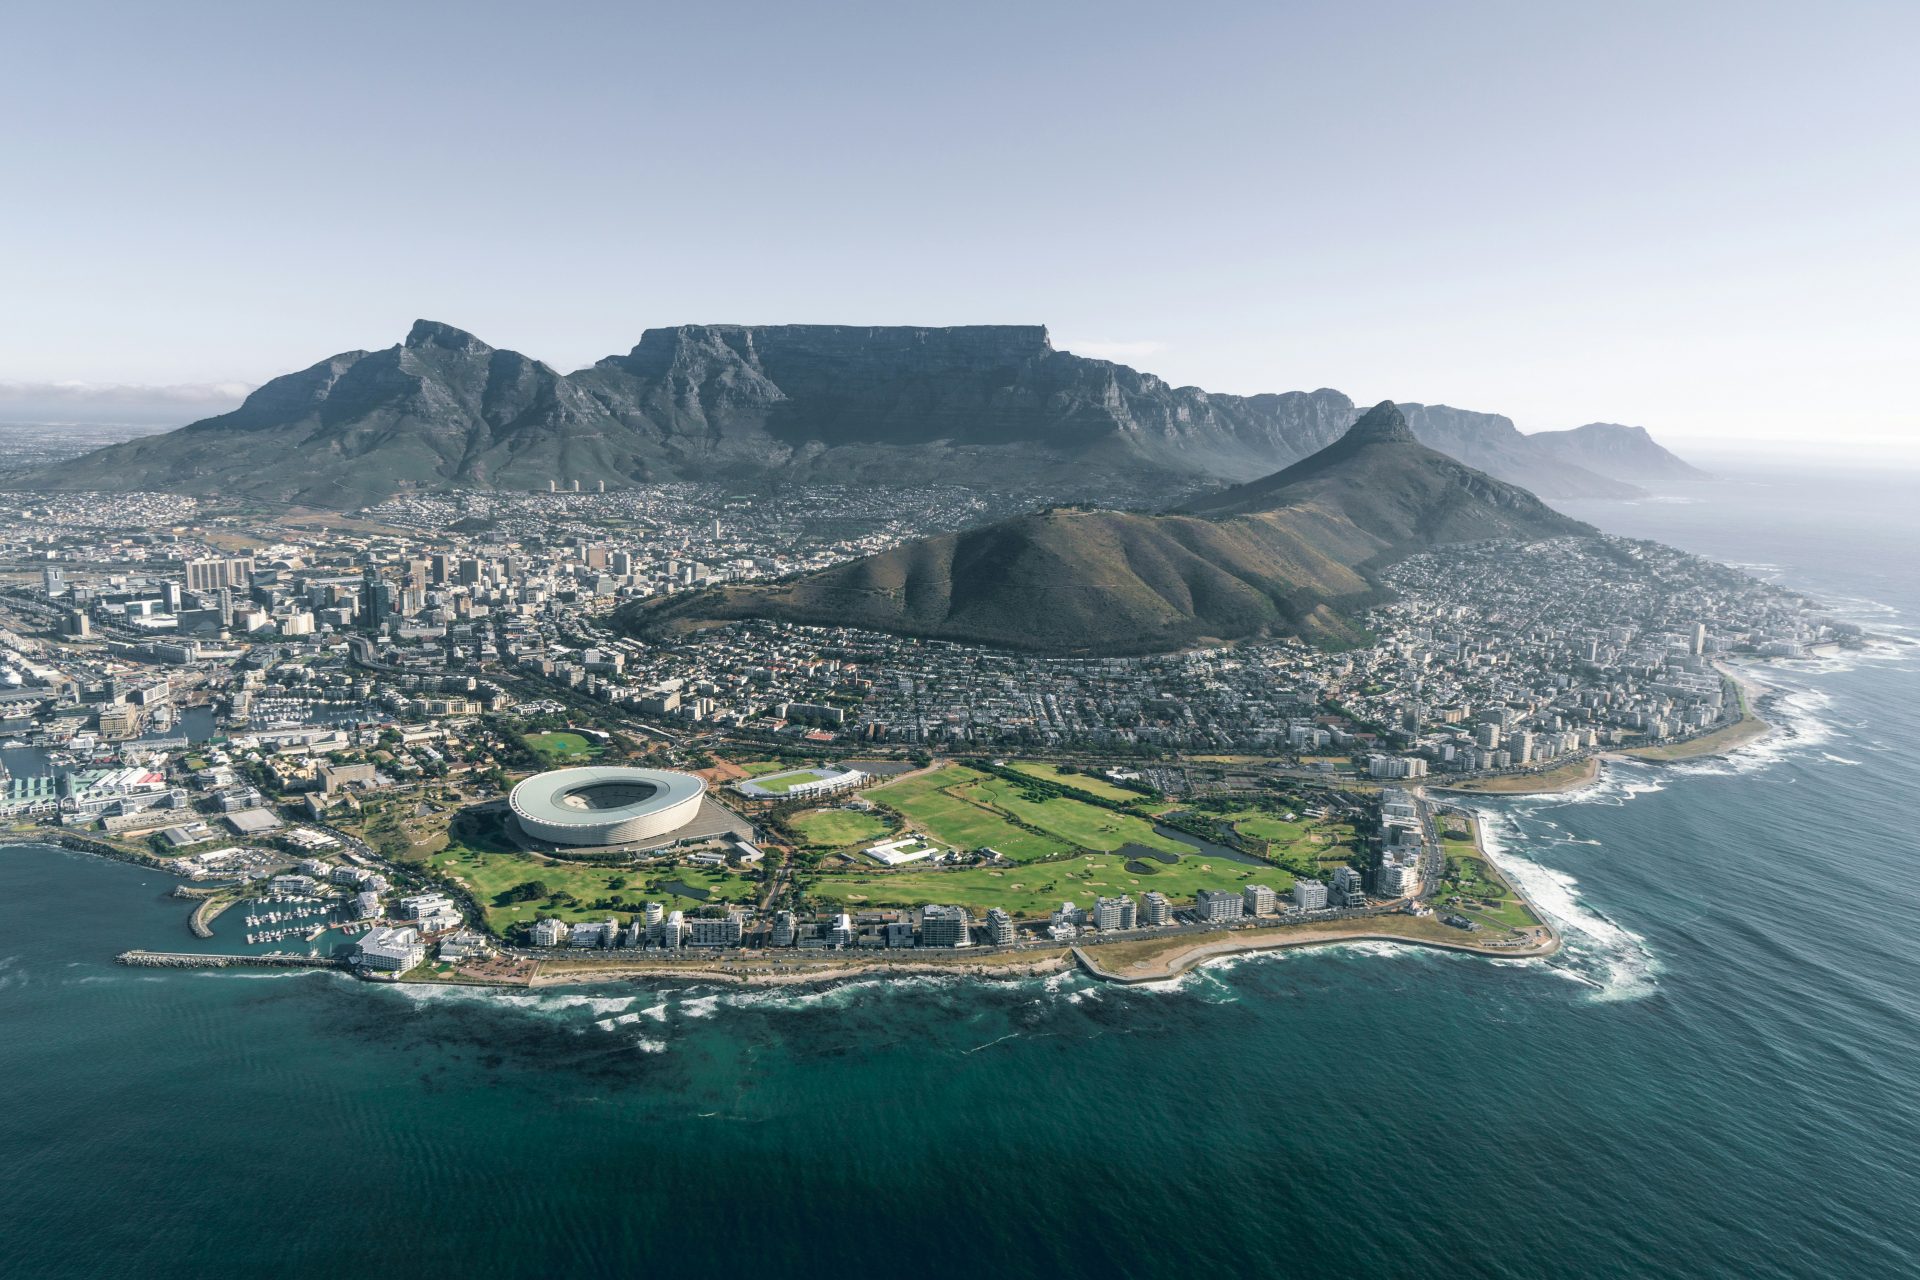 26. South Africa